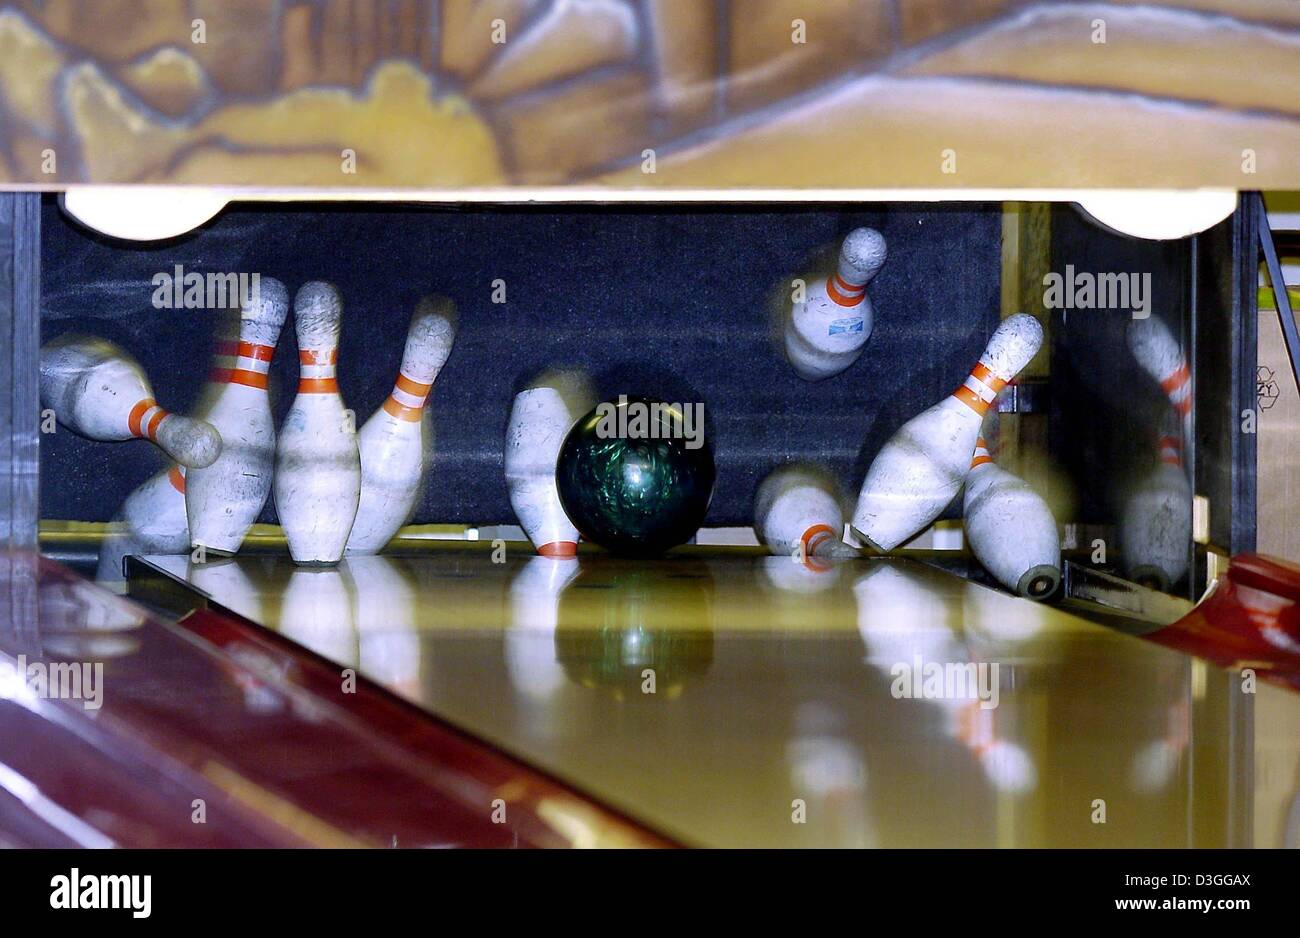 (dpa) - A bowling ball crashes into the pins at a bowling alley in Berlin, Germany, 26 August 2004. Bowling is a popular recreational activity loved by young and old. The rules are simple with each game lasting ten 'frames' in which each player, or bowler, has two tries to roll the bowling ball down a wooden or artificial lane and knock over ten wooden pins. The bowling lane is 18. Stock Photo